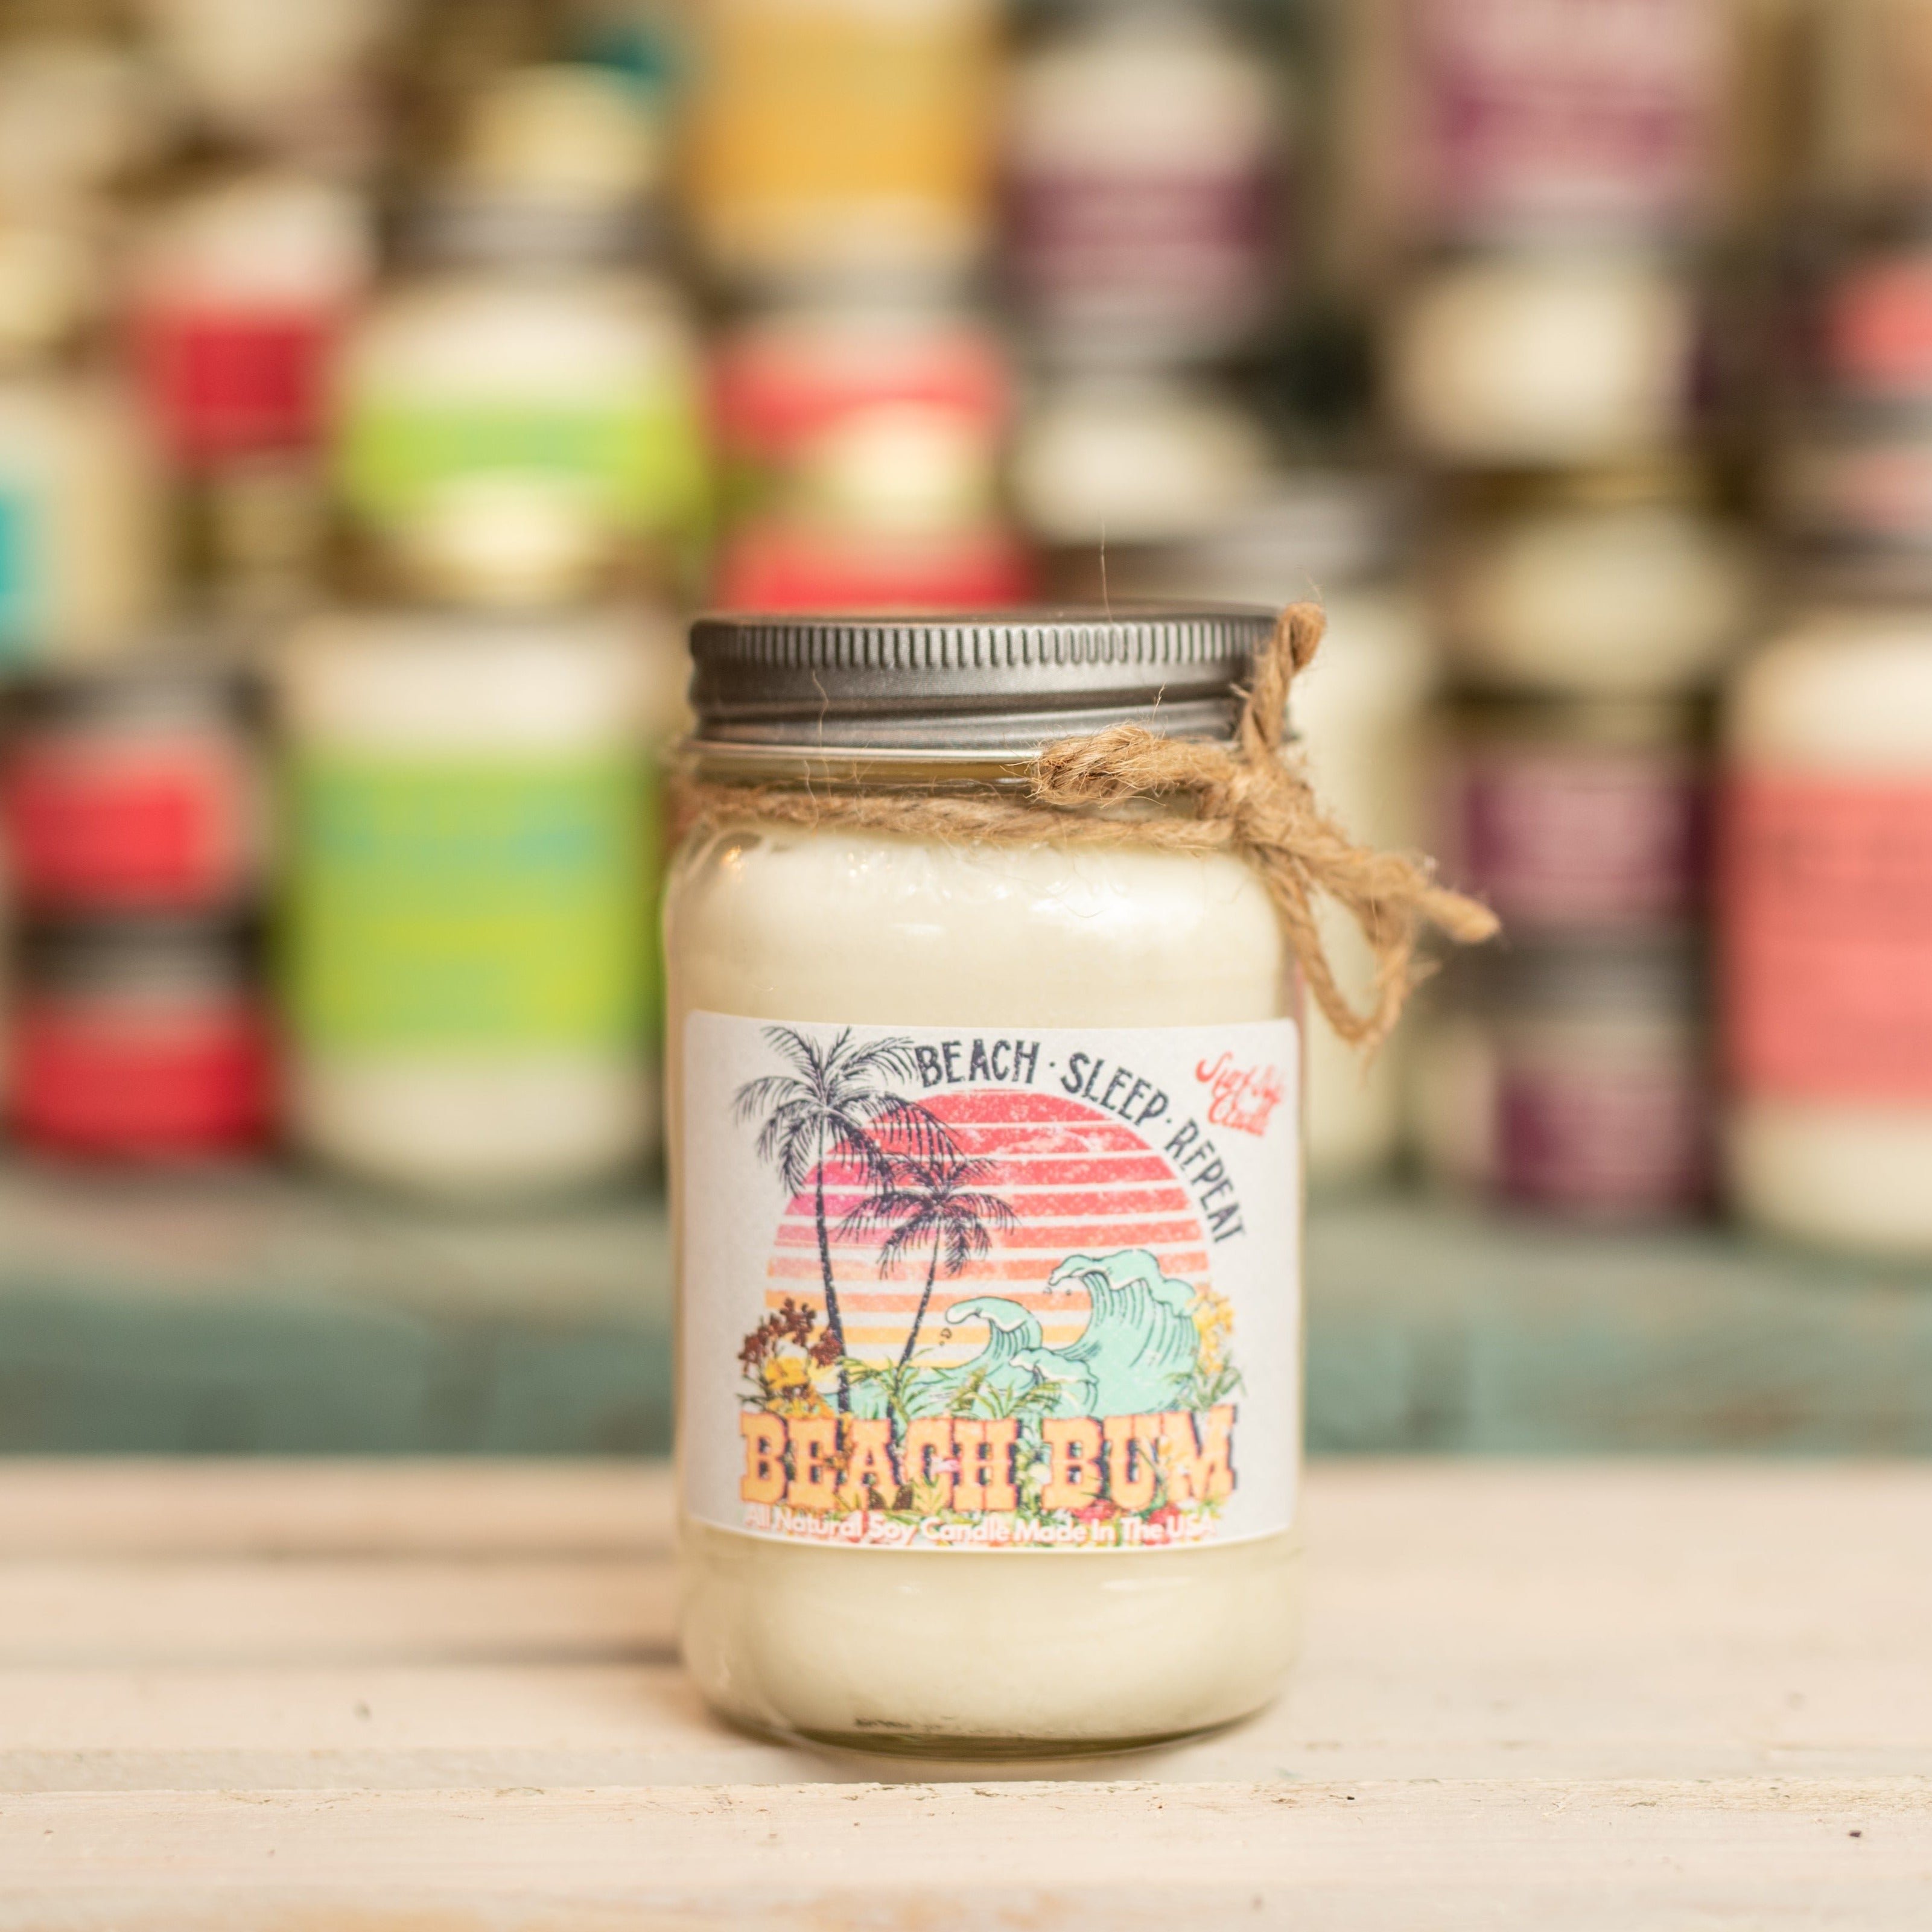 Beach Bum Candle: All-Natural Soy with Coconut and Lime Fragrance –  outofdarknesscandleco